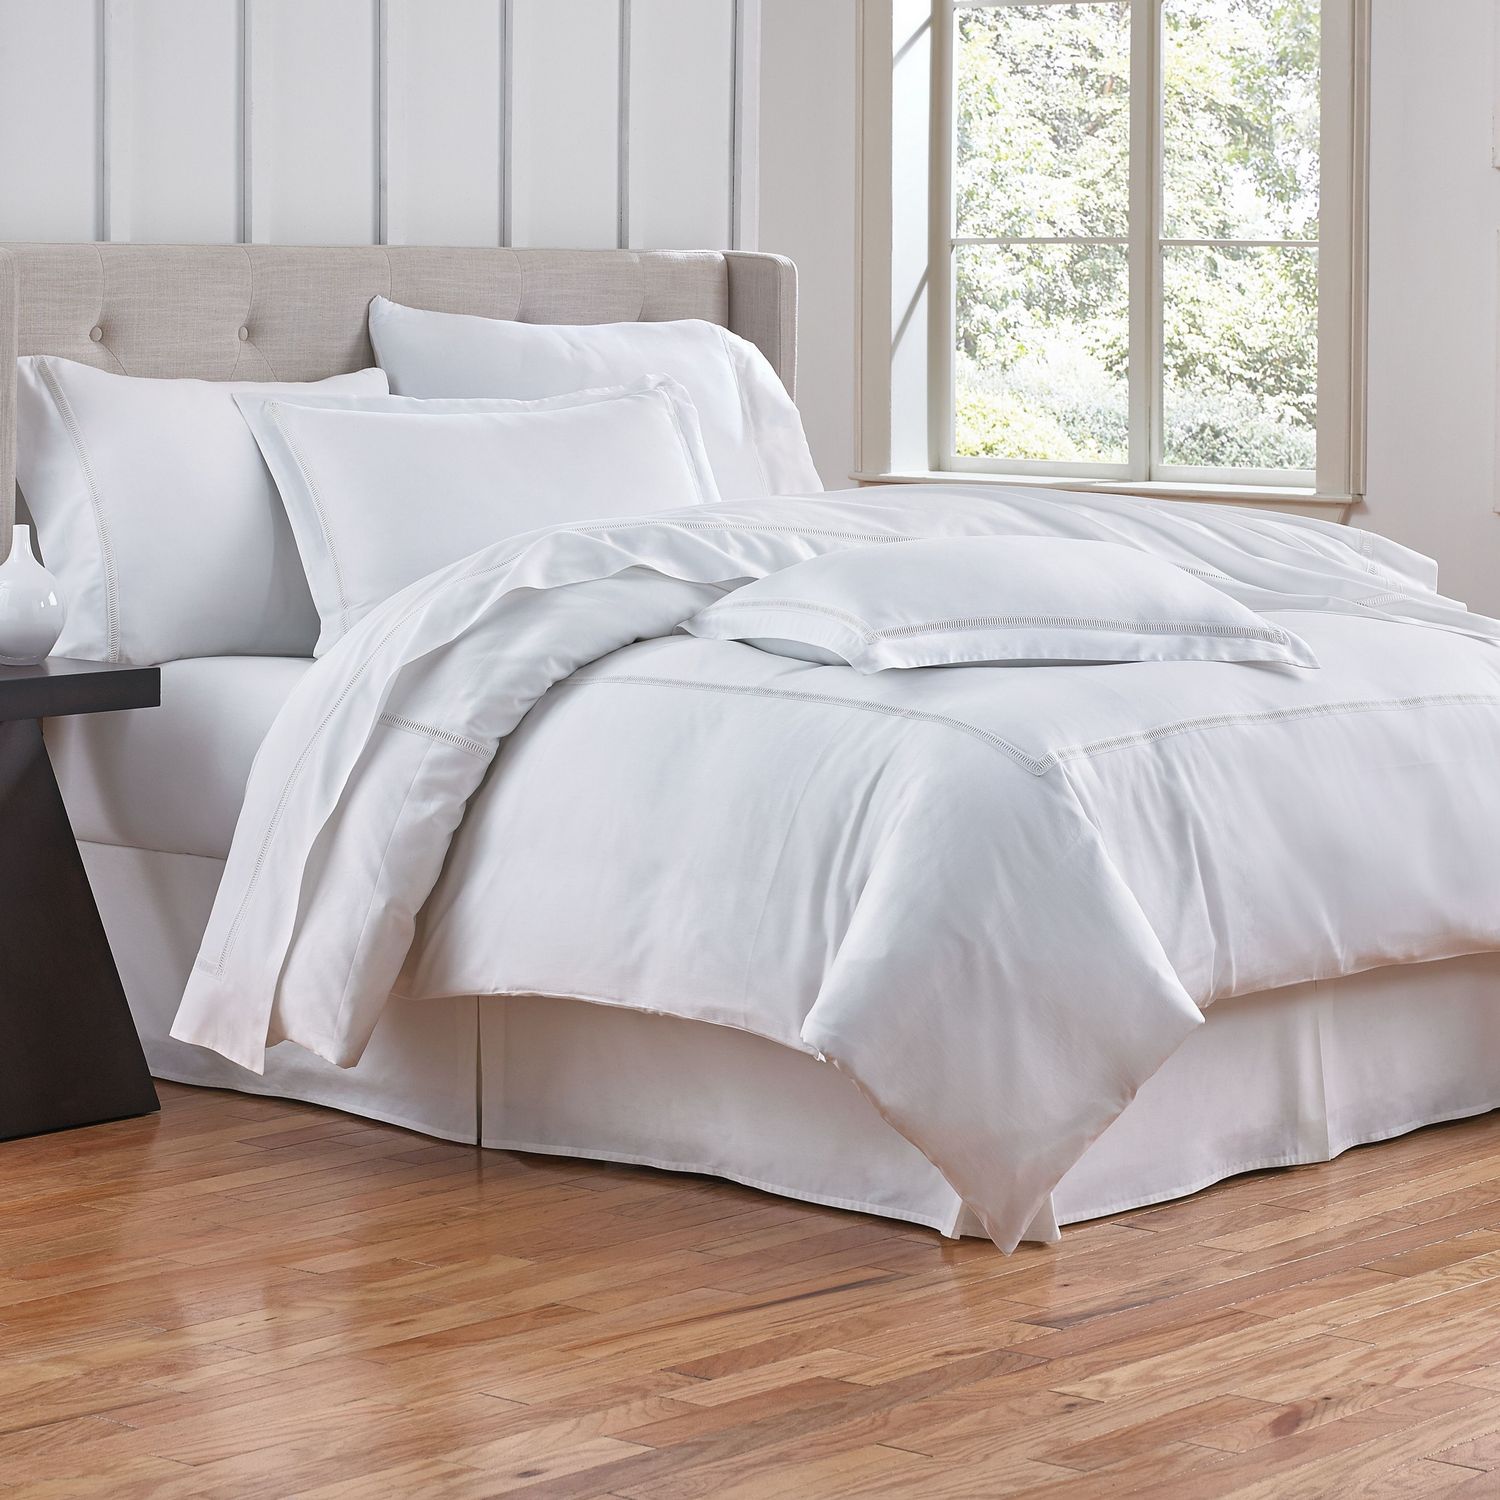 *Traditions Linens Bedding Organza Collection